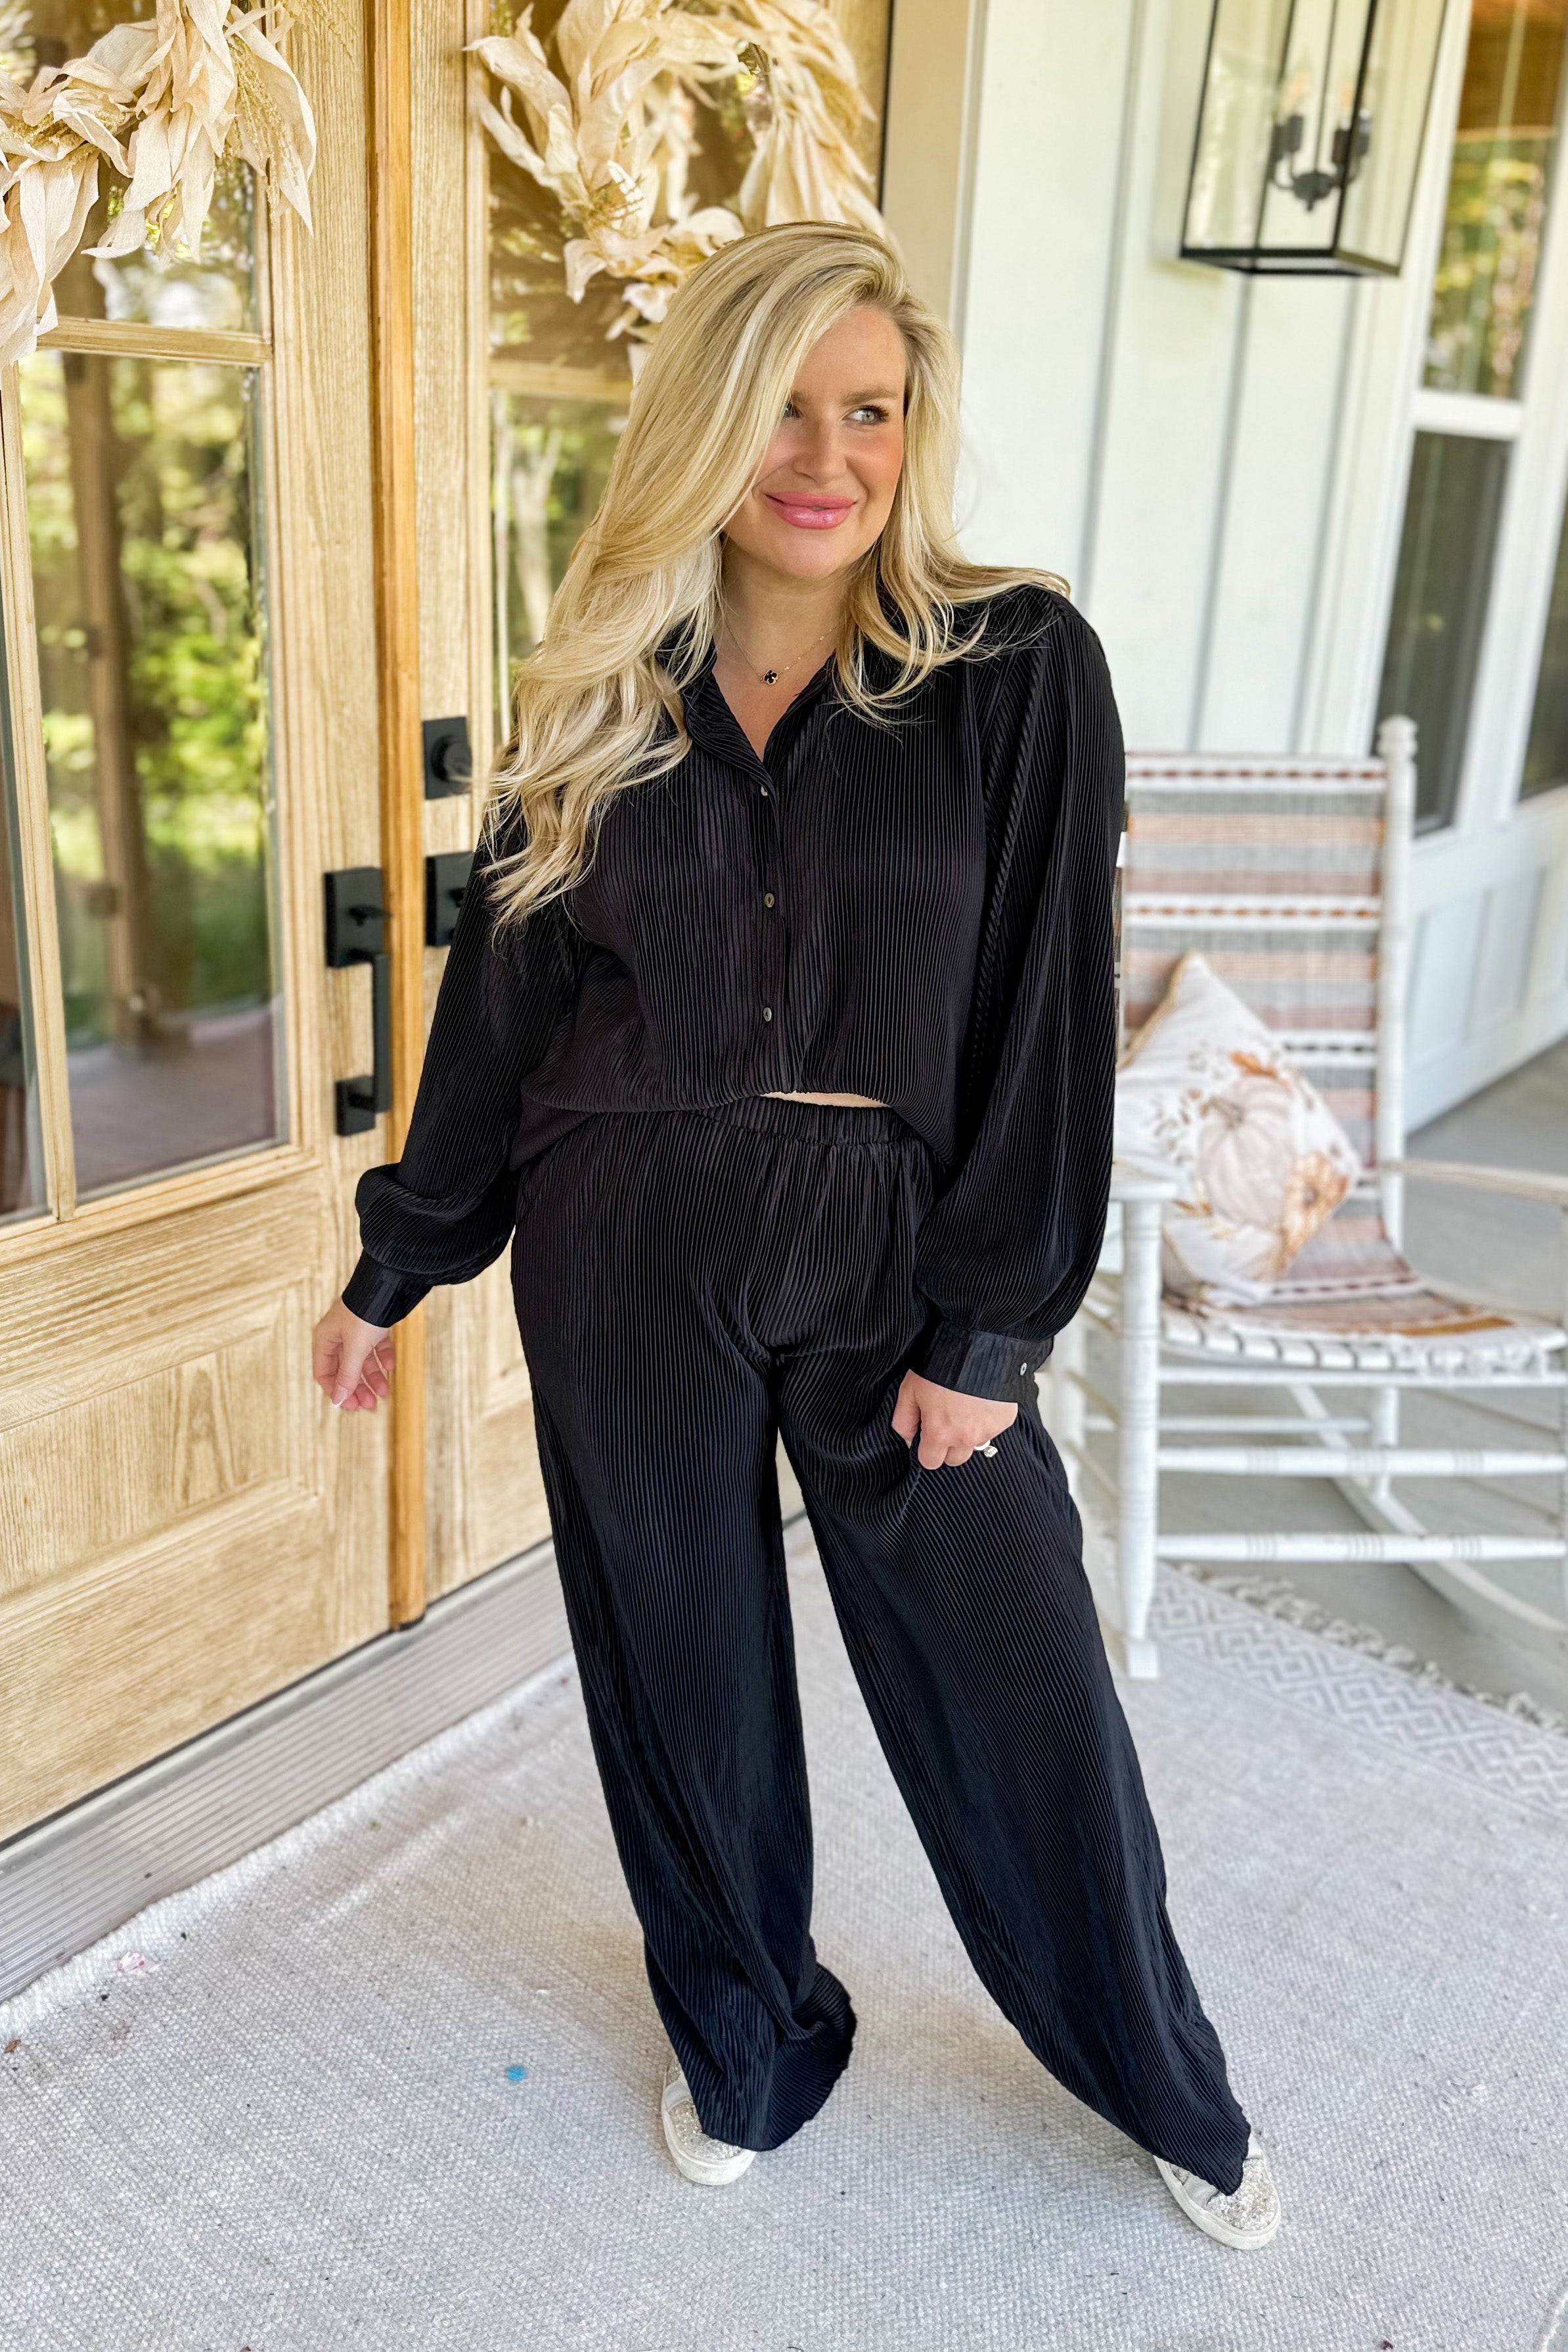 Dominic Plisse Long Sleeve Blouse and Bottom Set - Be You Boutique